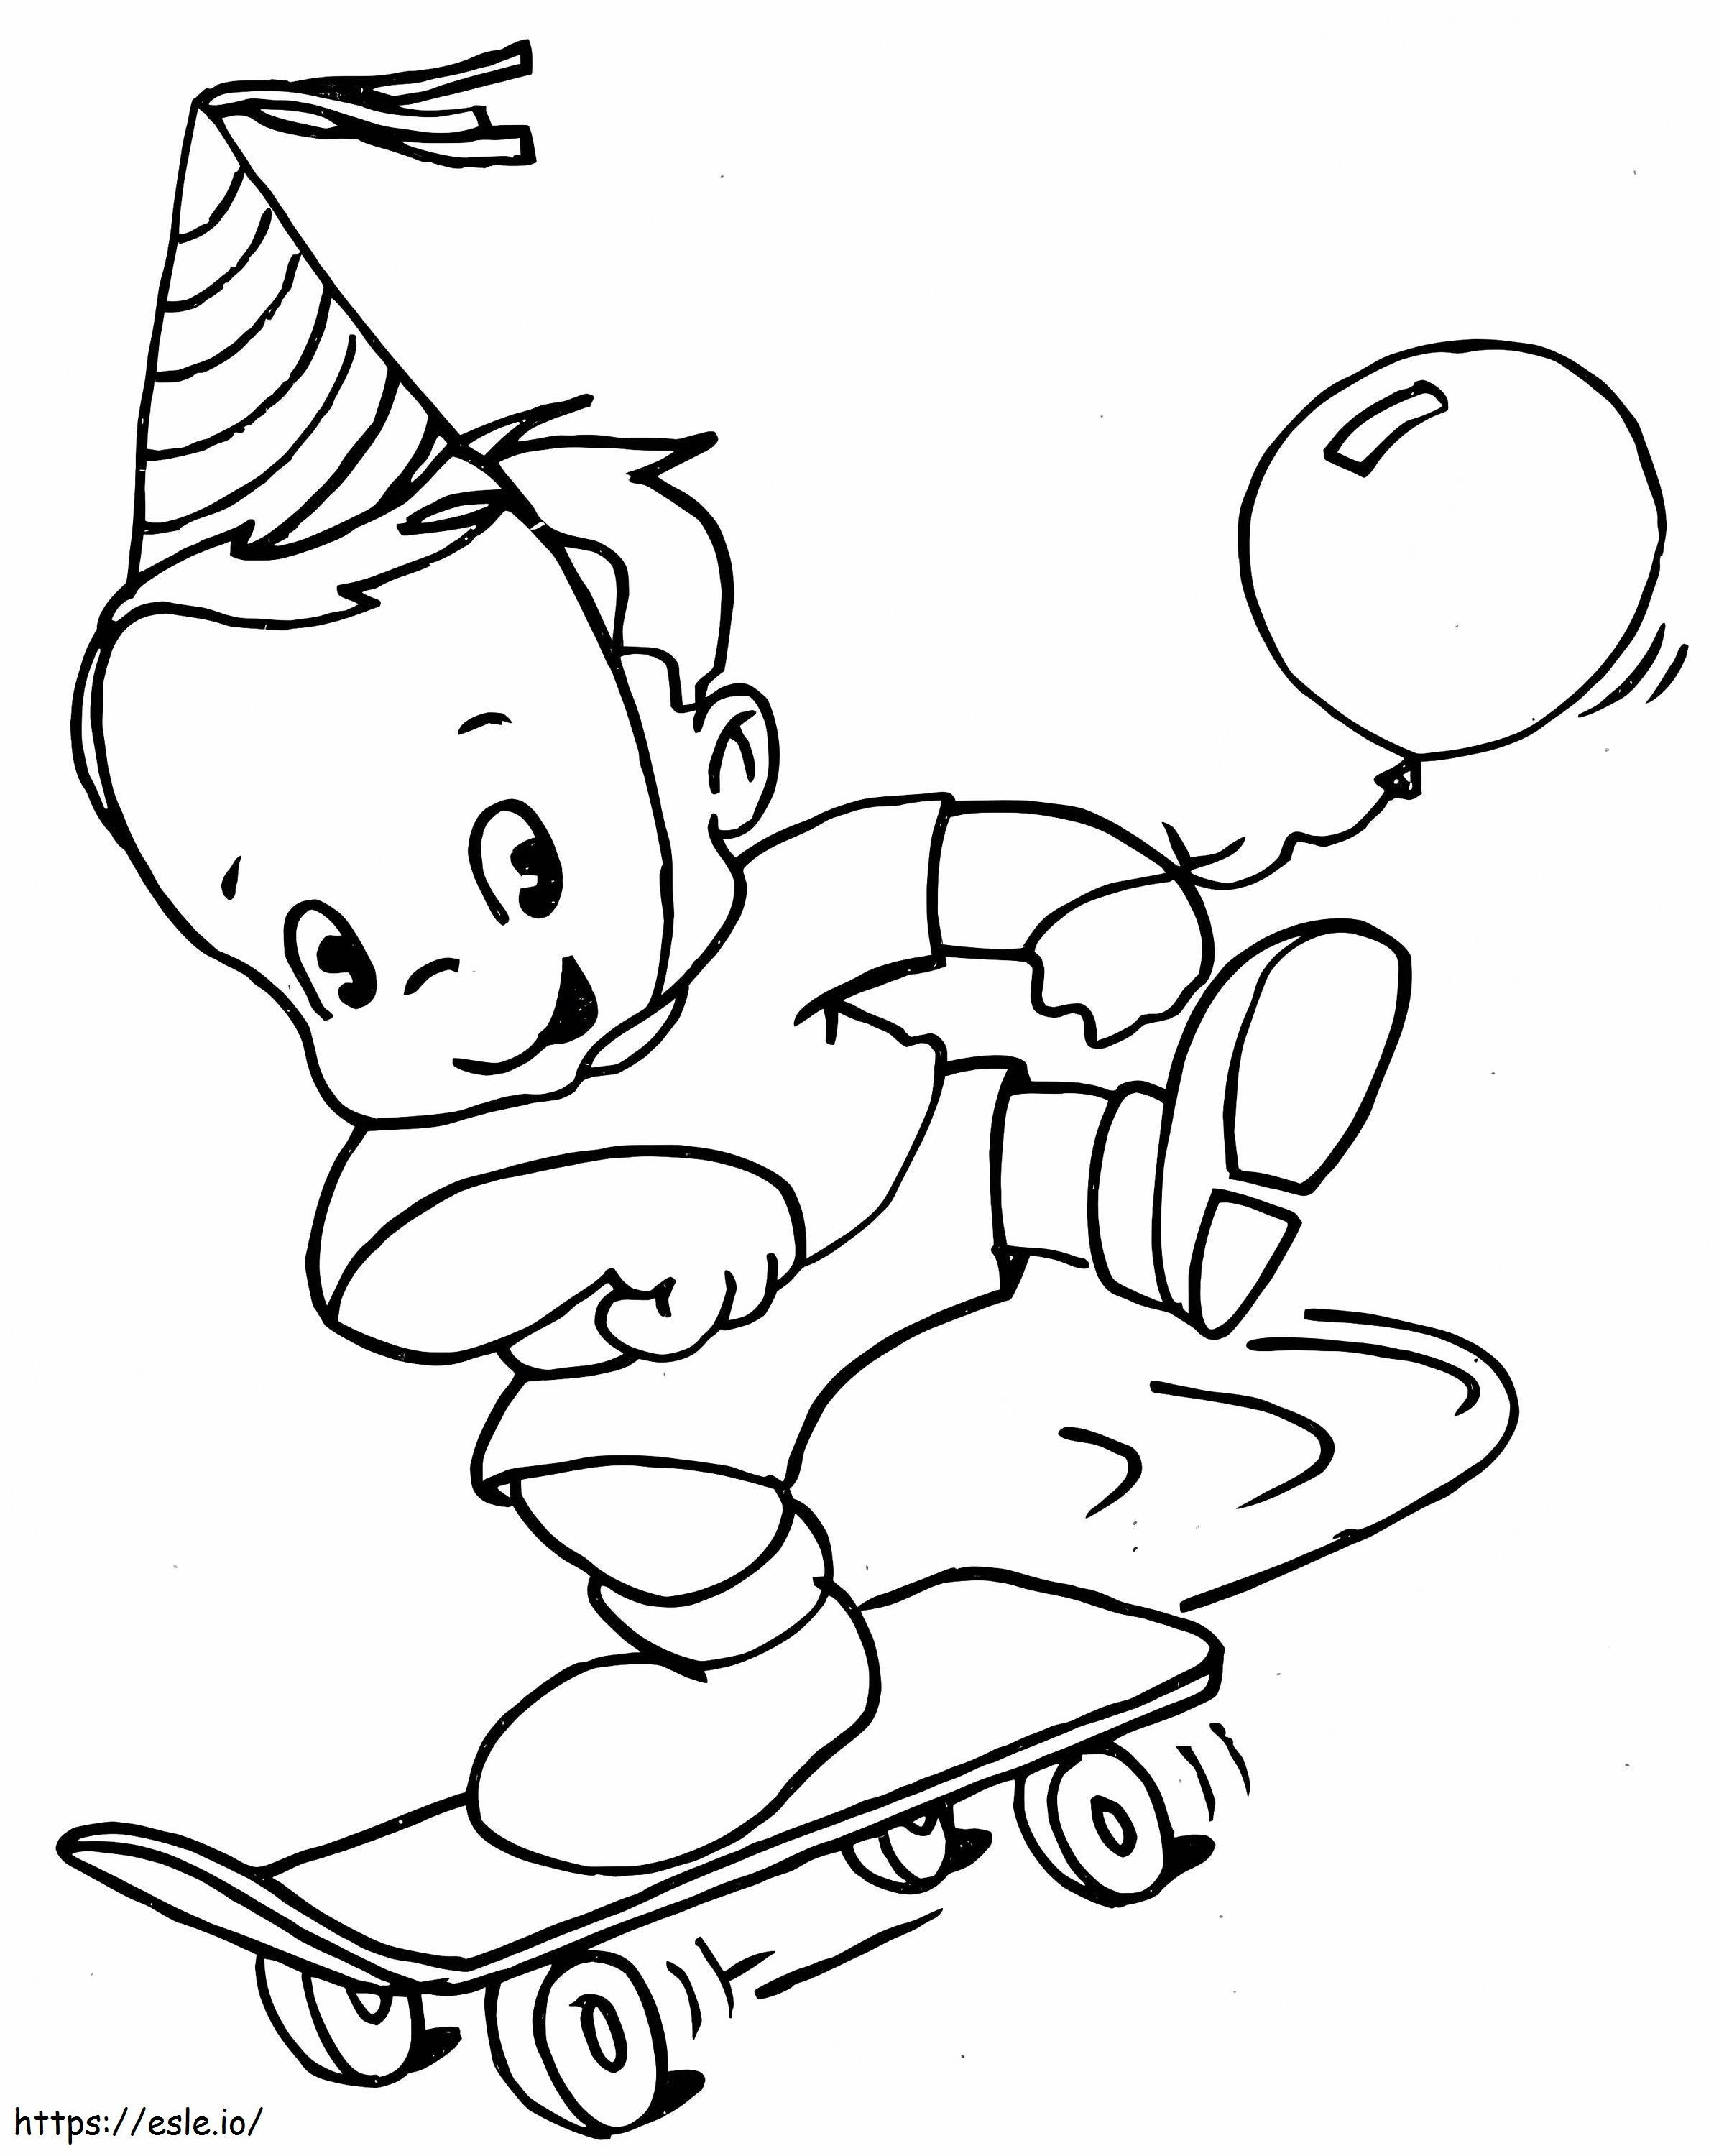 A Child With Skateboard coloring page